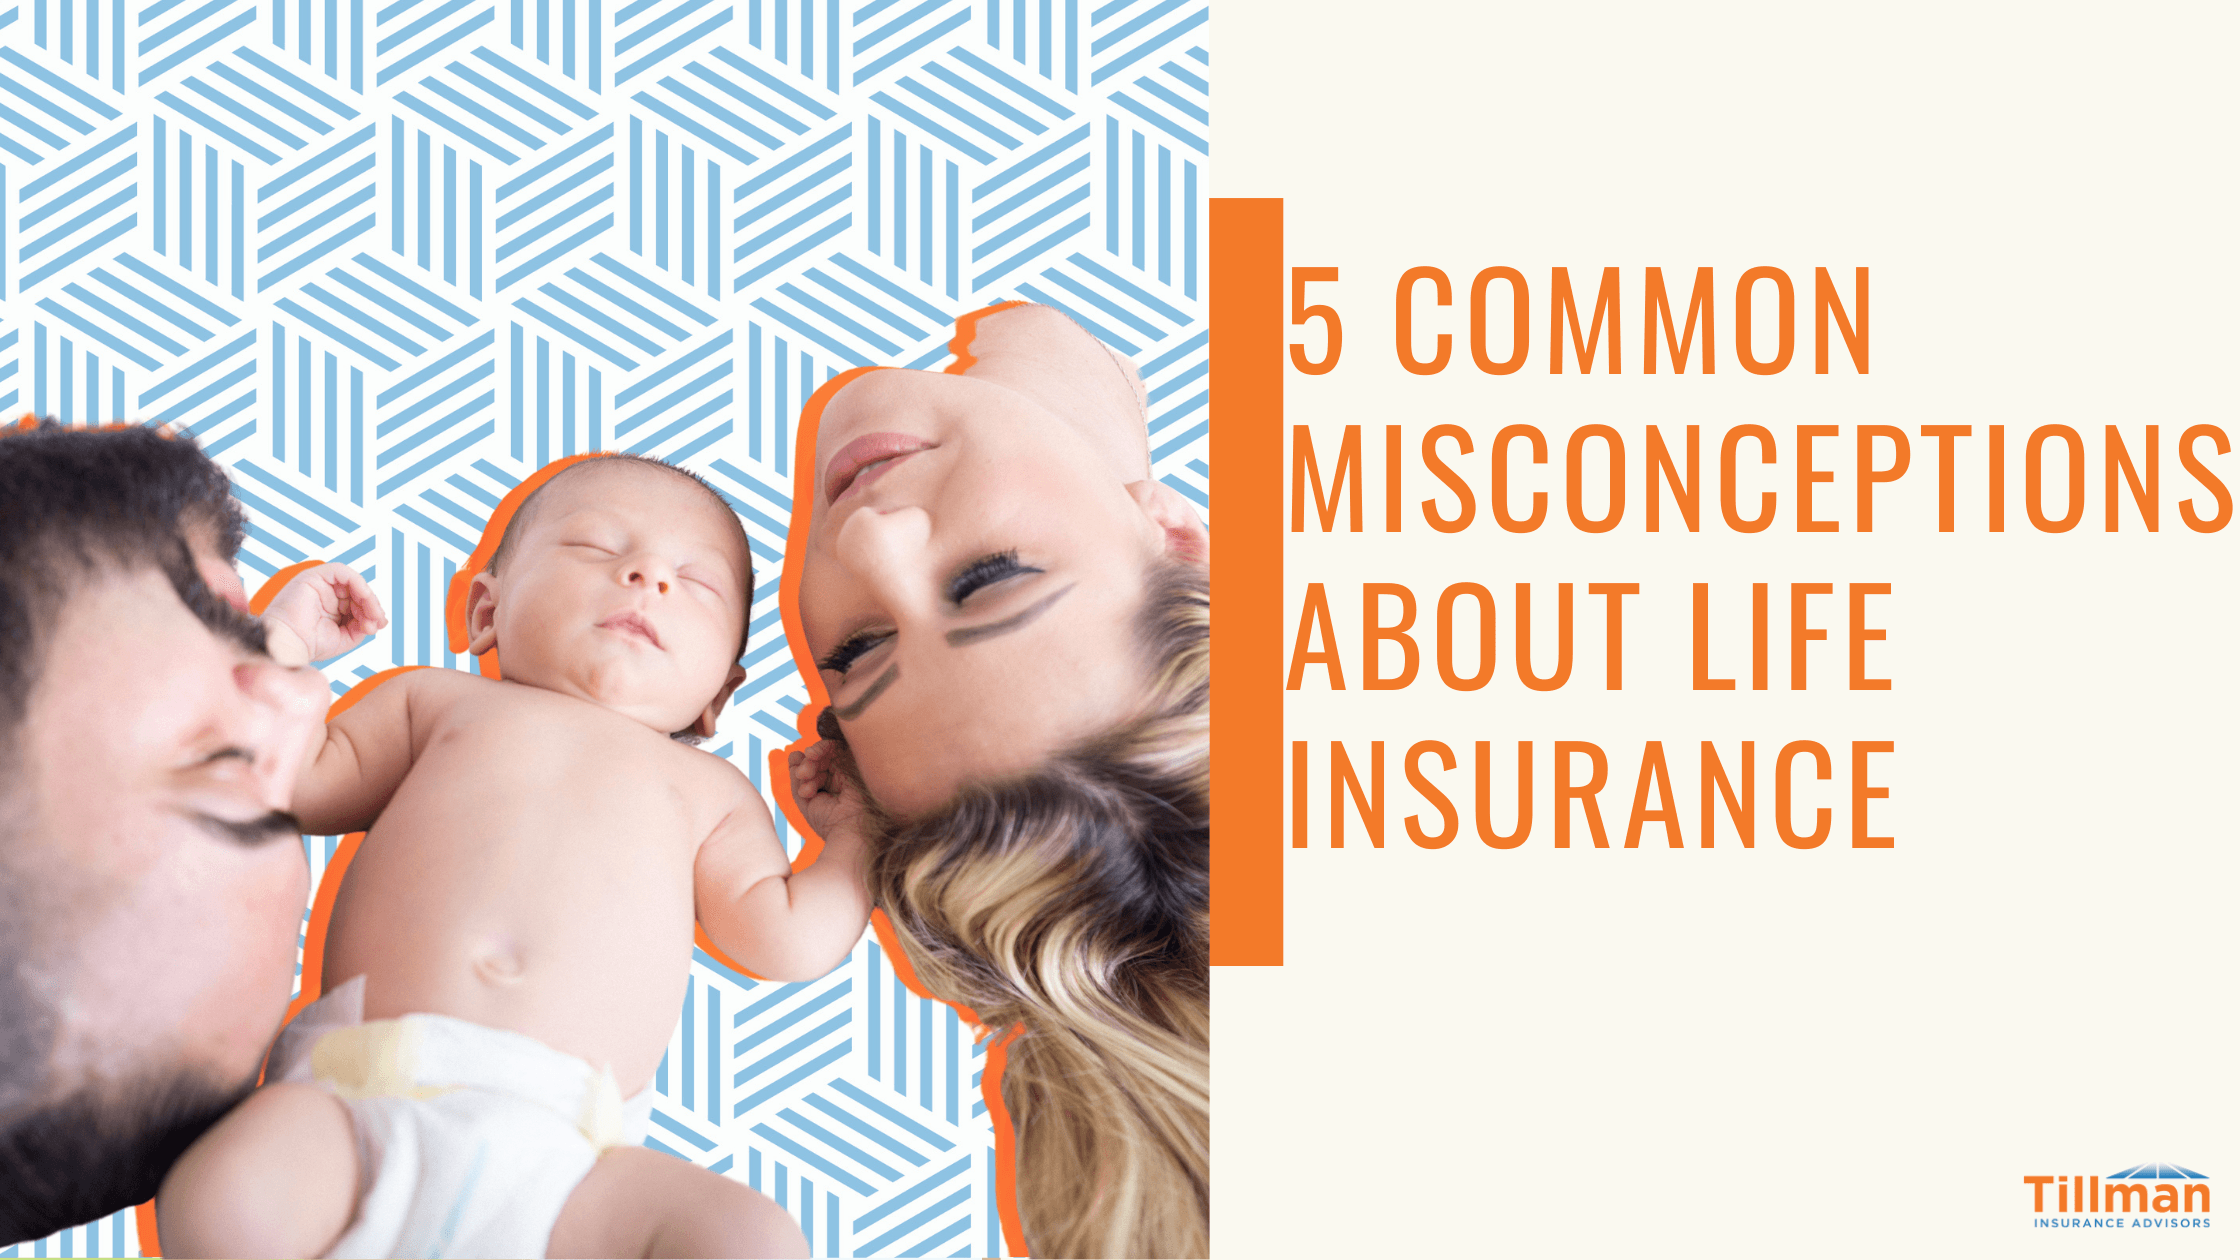 5 Common Misconceptions About Life Insurance Tillman Insurance Advisors